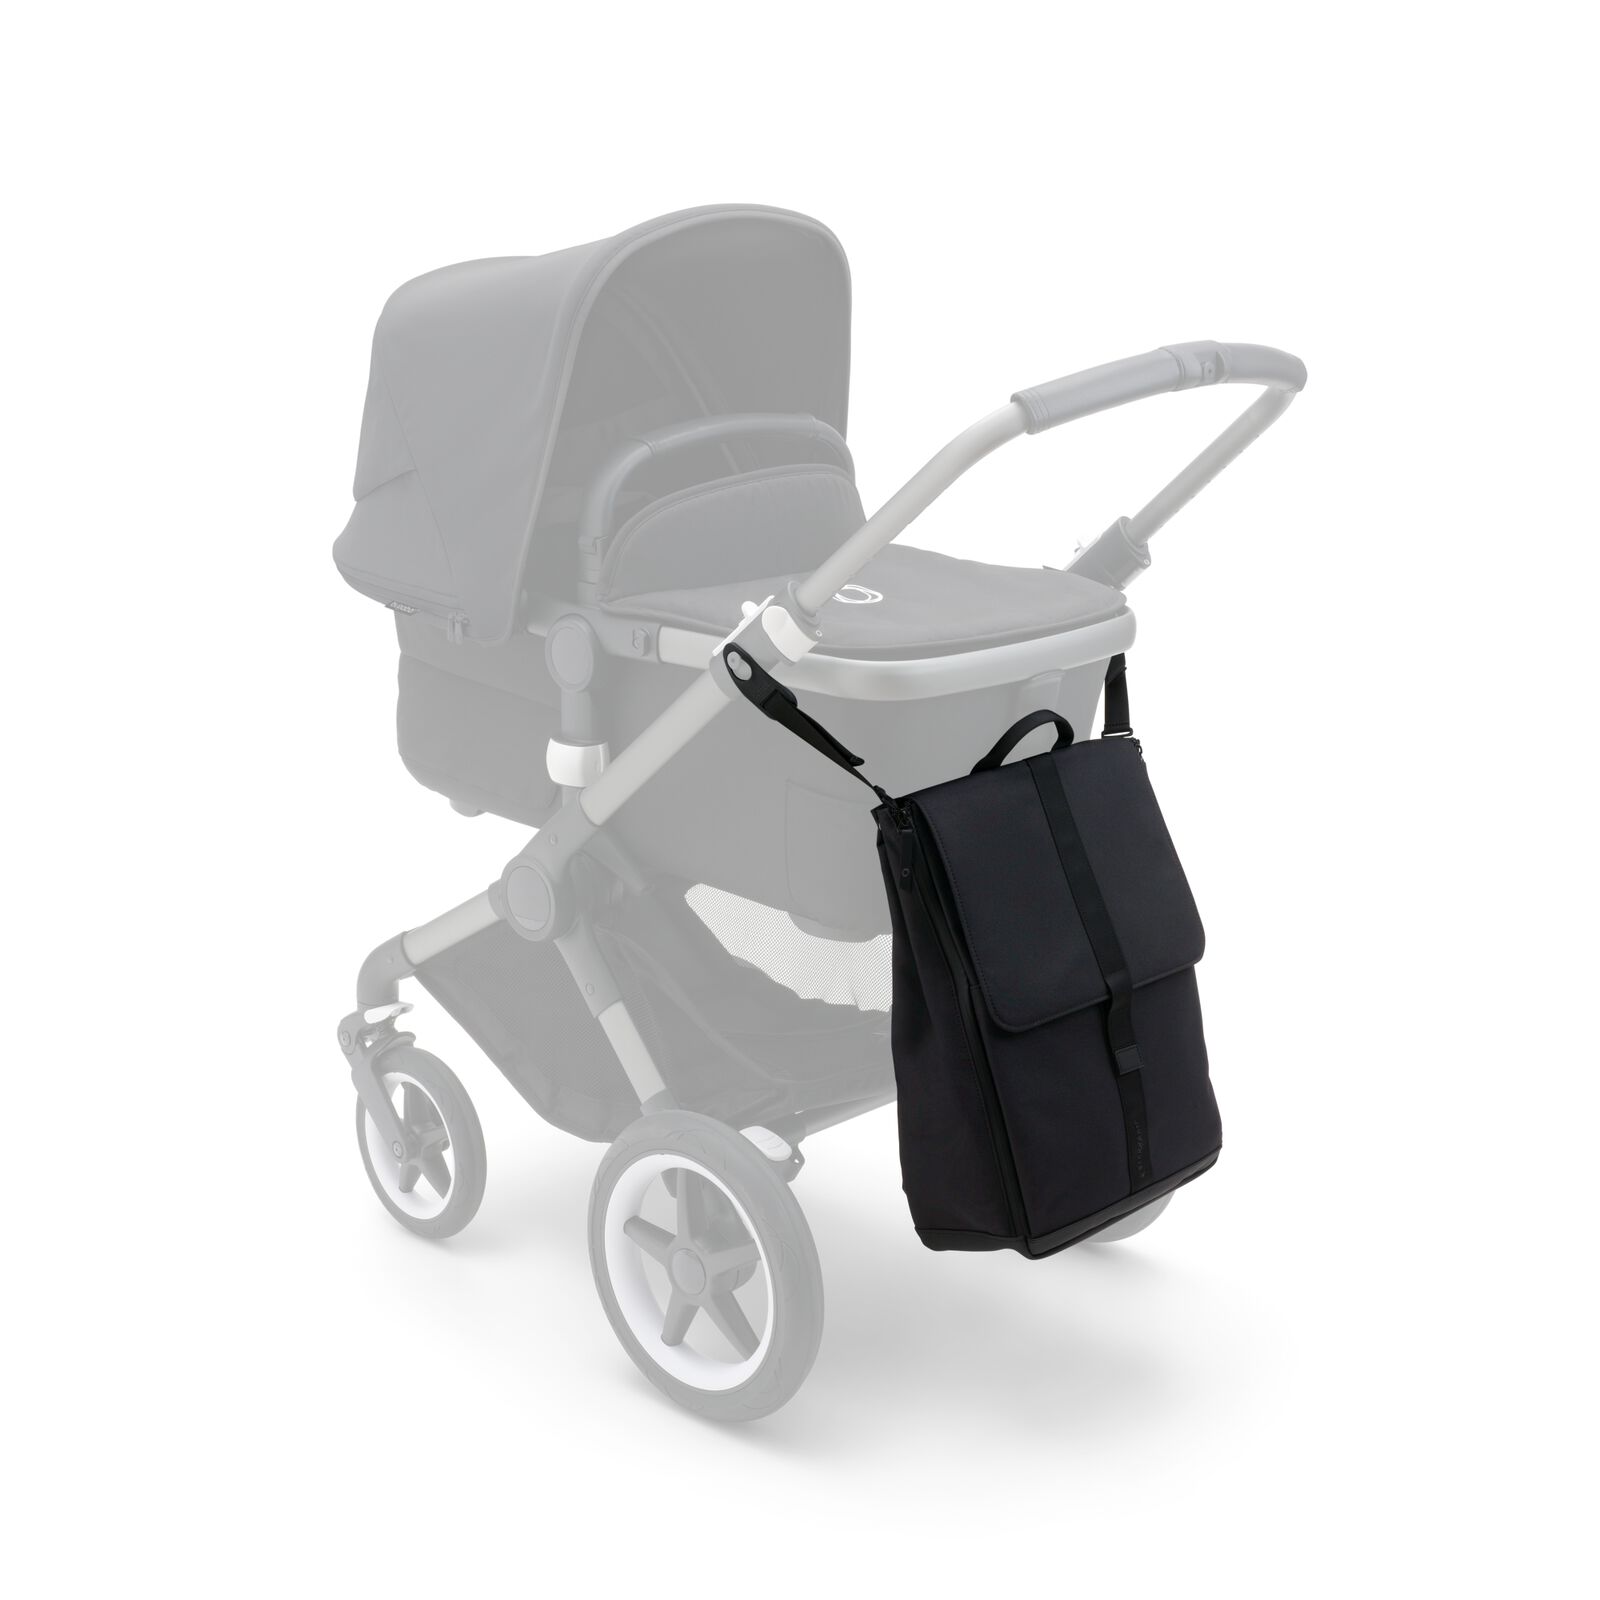 Bugaboo changing backpack - View 8